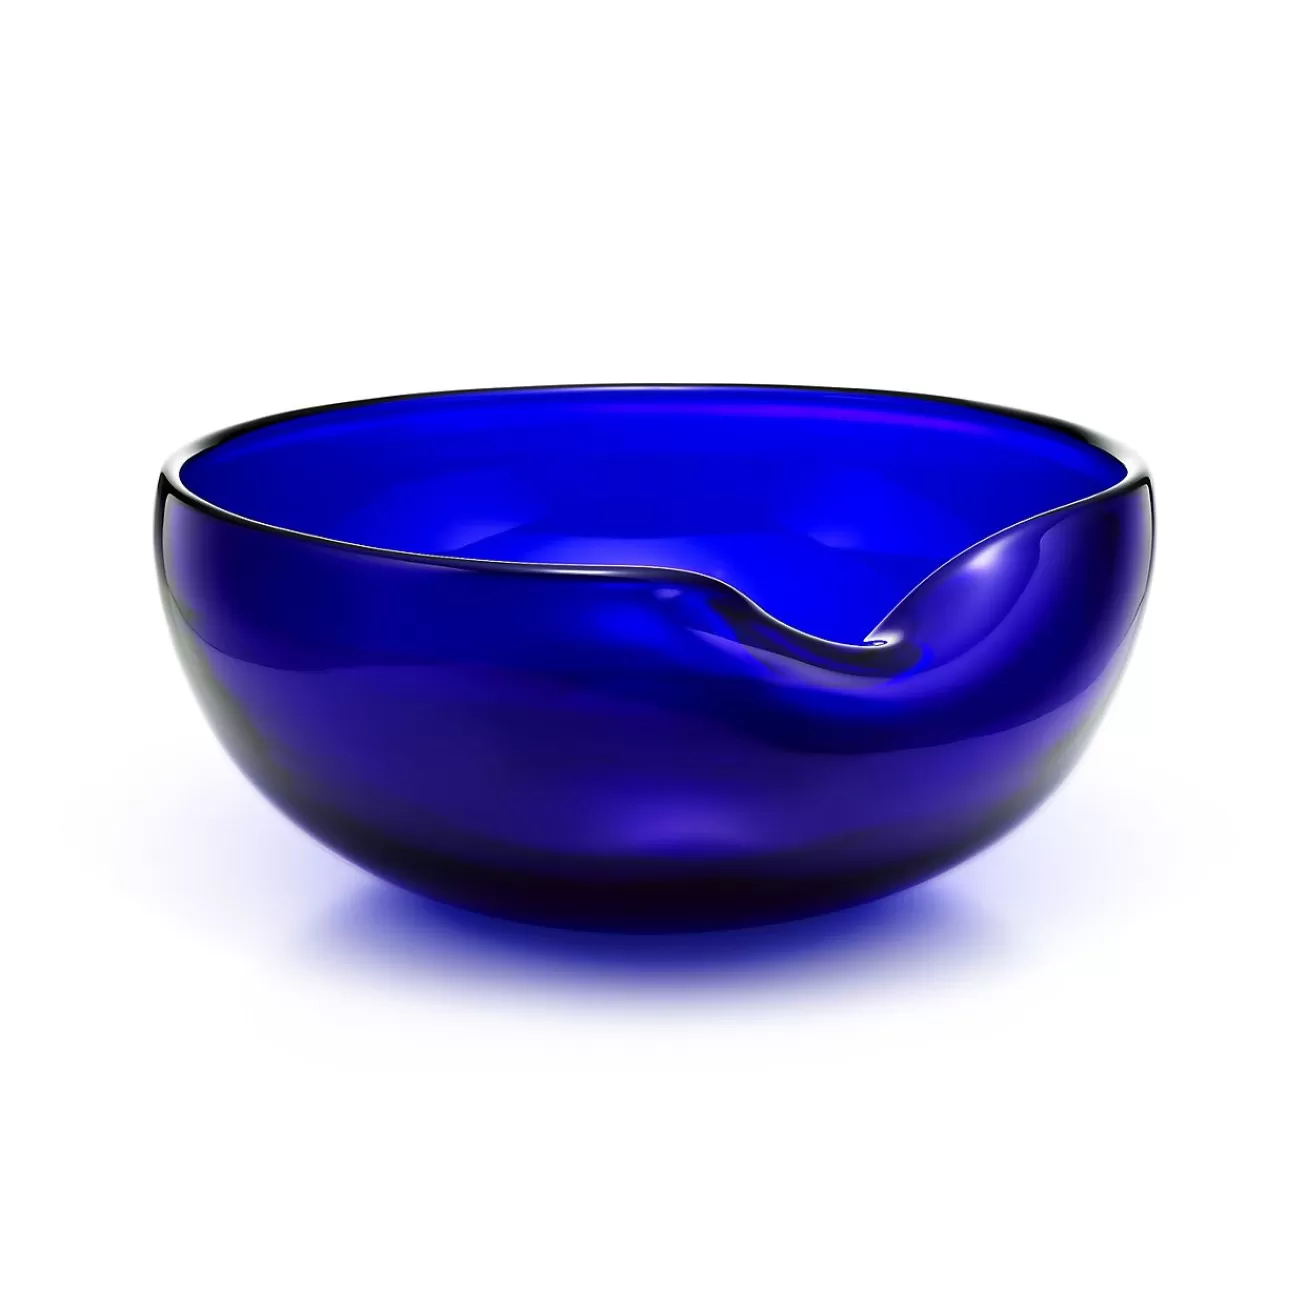 Tiffany & Co. Elsa Peretti® Thumbprint bowl in cobalt glass. More sizes available. | ^ The Home | Housewarming Gifts